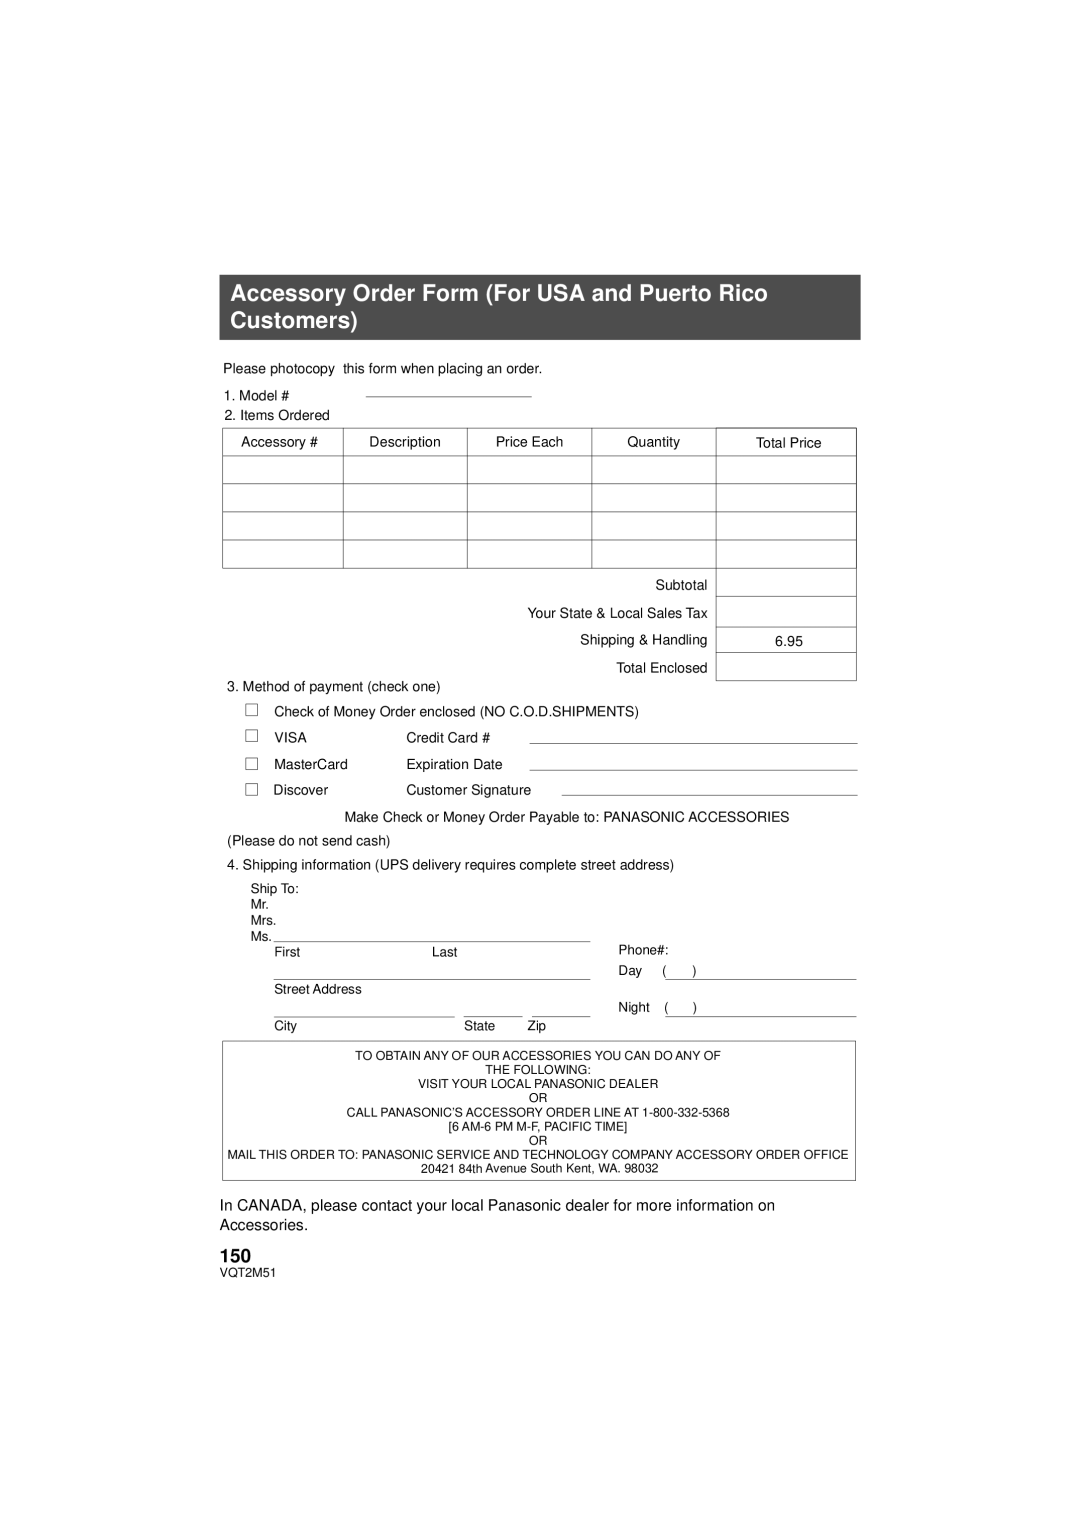 Panasonic HDC-TM55P/PC, HDC-SD60P/PC, HDC-TM60P/PC, HDC-HS60P/PC Accessory Order Form For USA and Puerto Rico Customers 